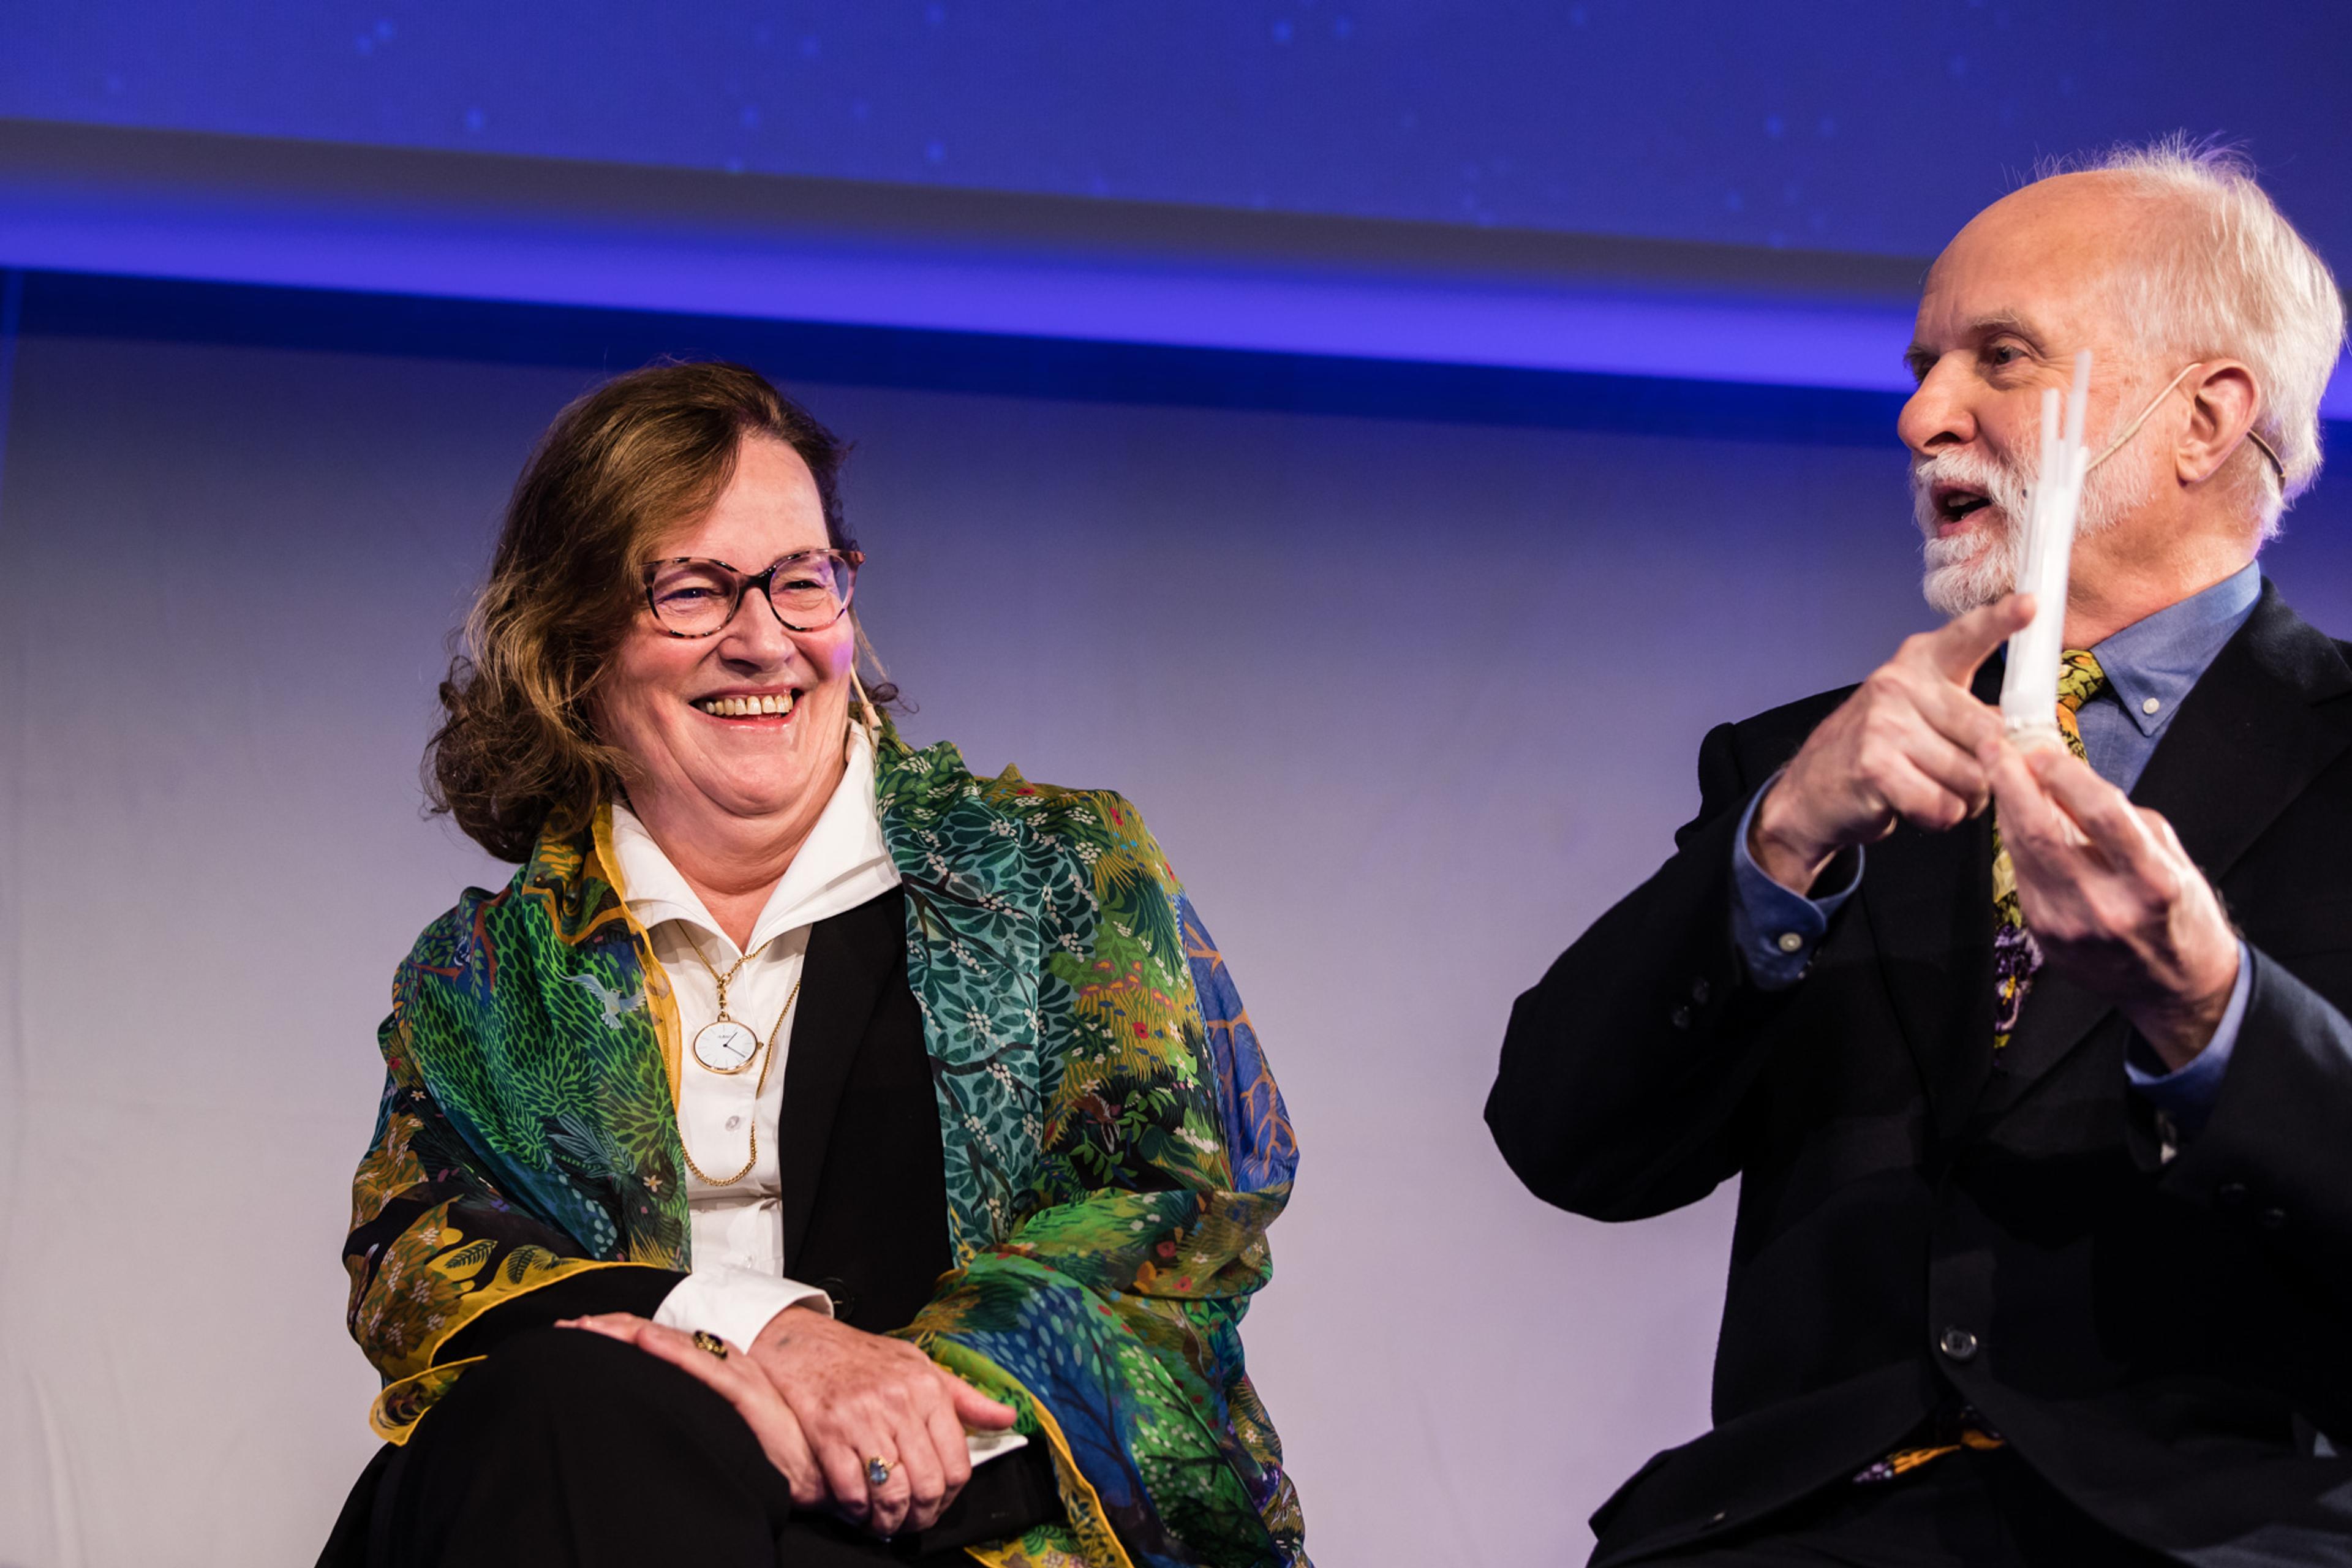 Christine Petit and A. James Hudspeth on stage during the interview session in the Kalvi Prize week in Oslo. 